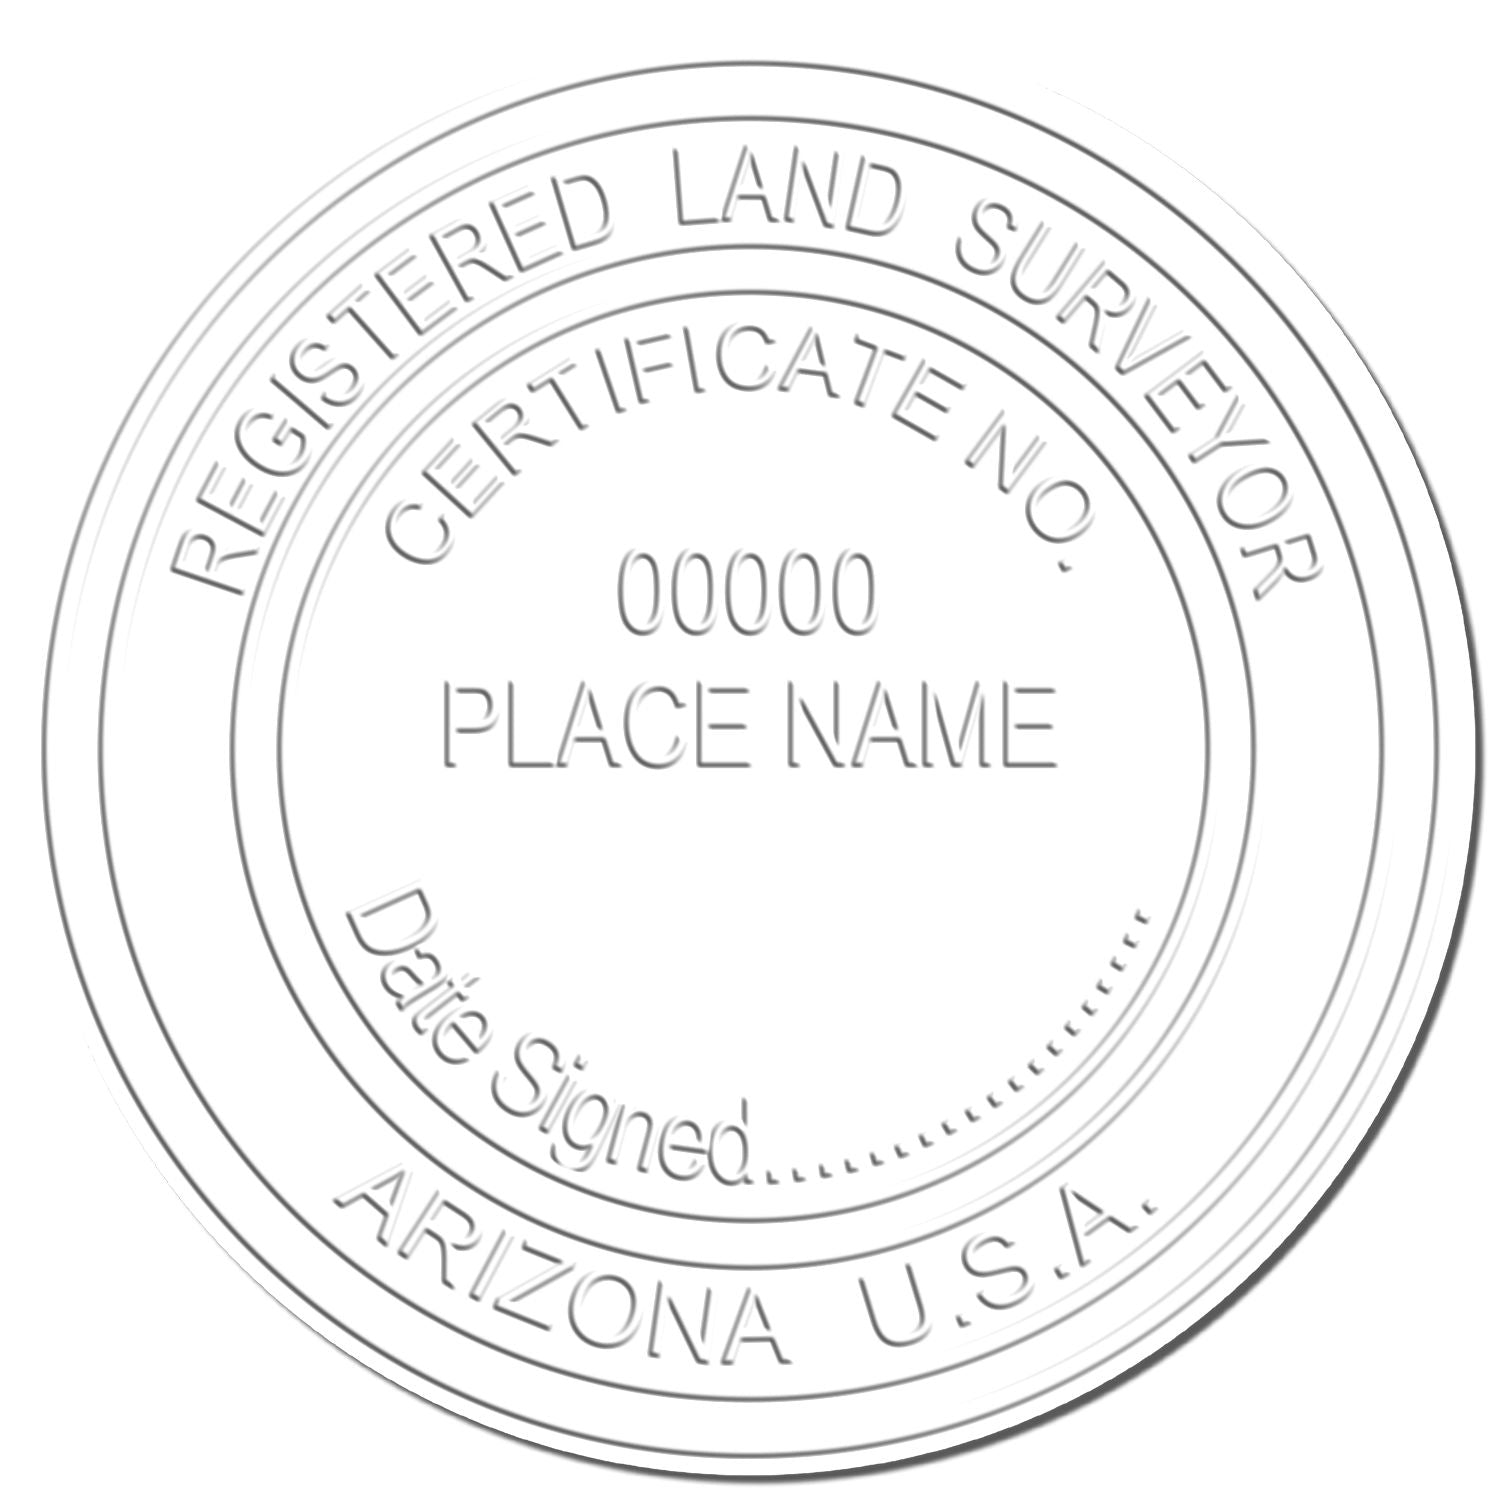 The main image for the Long Reach Arizona Land Surveyor Seal depicting a sample of the imprint and electronic files